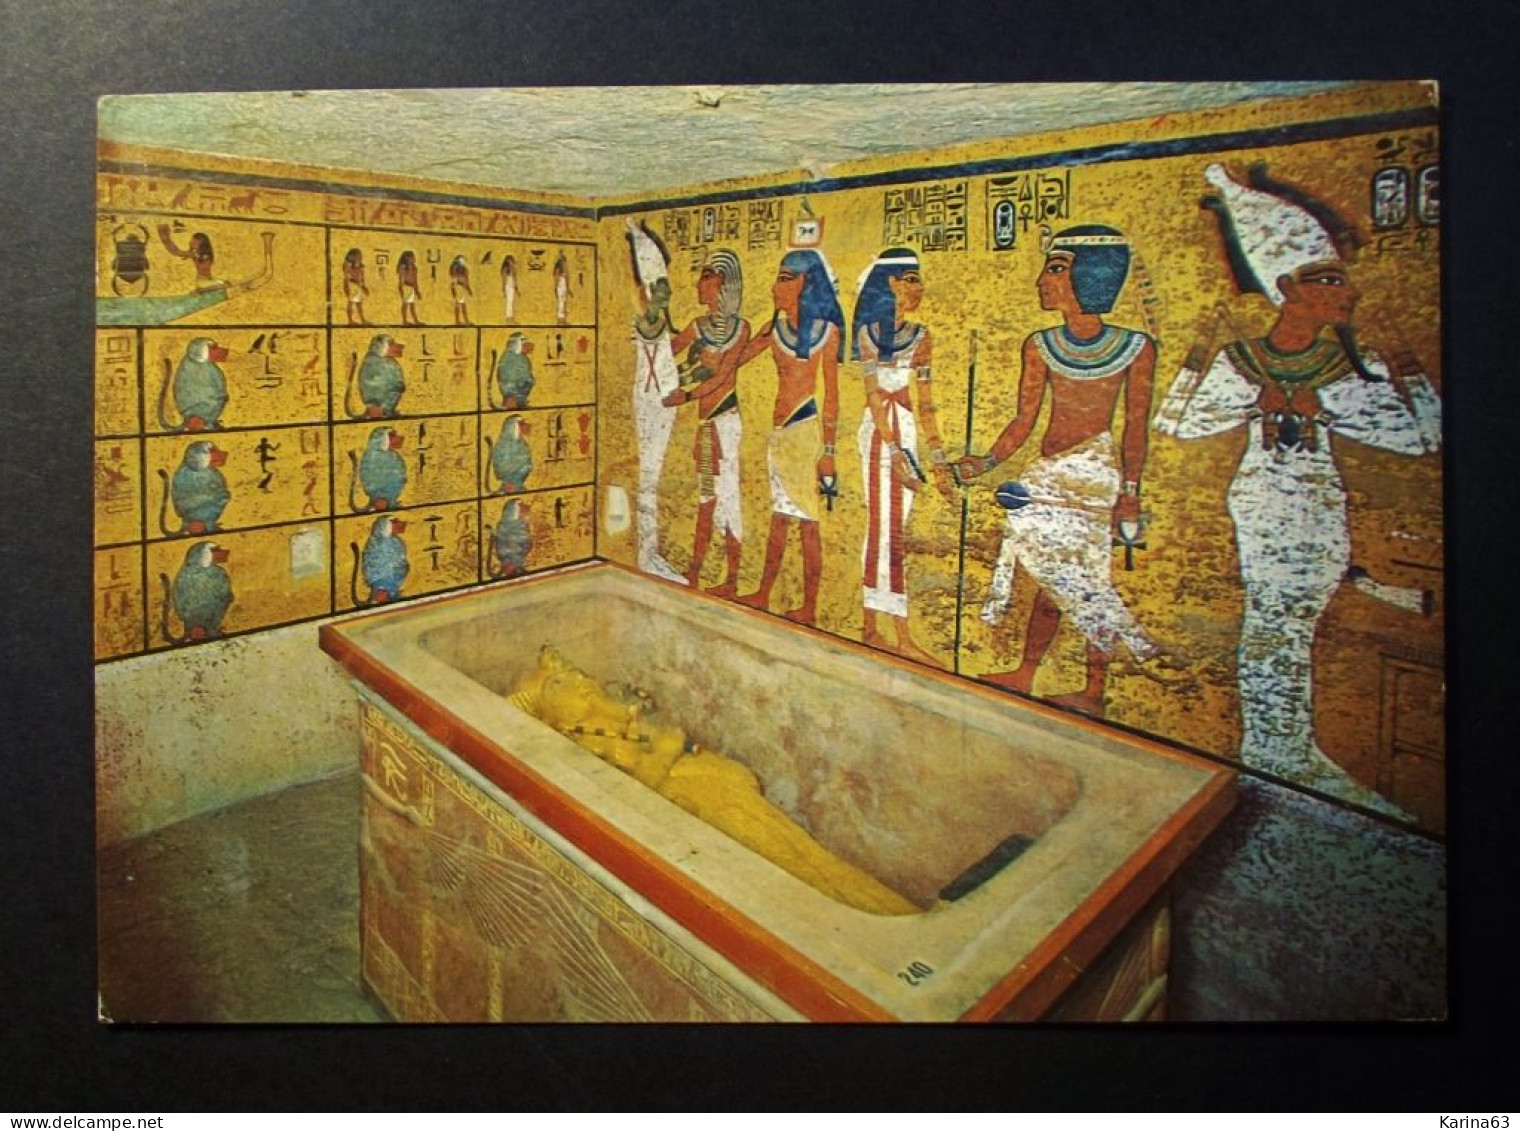 Egypt  - Luxor -  King's Valley - Mummy Of Tut Ankh Amun In The Golden Coffin - Used With Stamp 1978 PYRAMID SAKHARA - Louxor